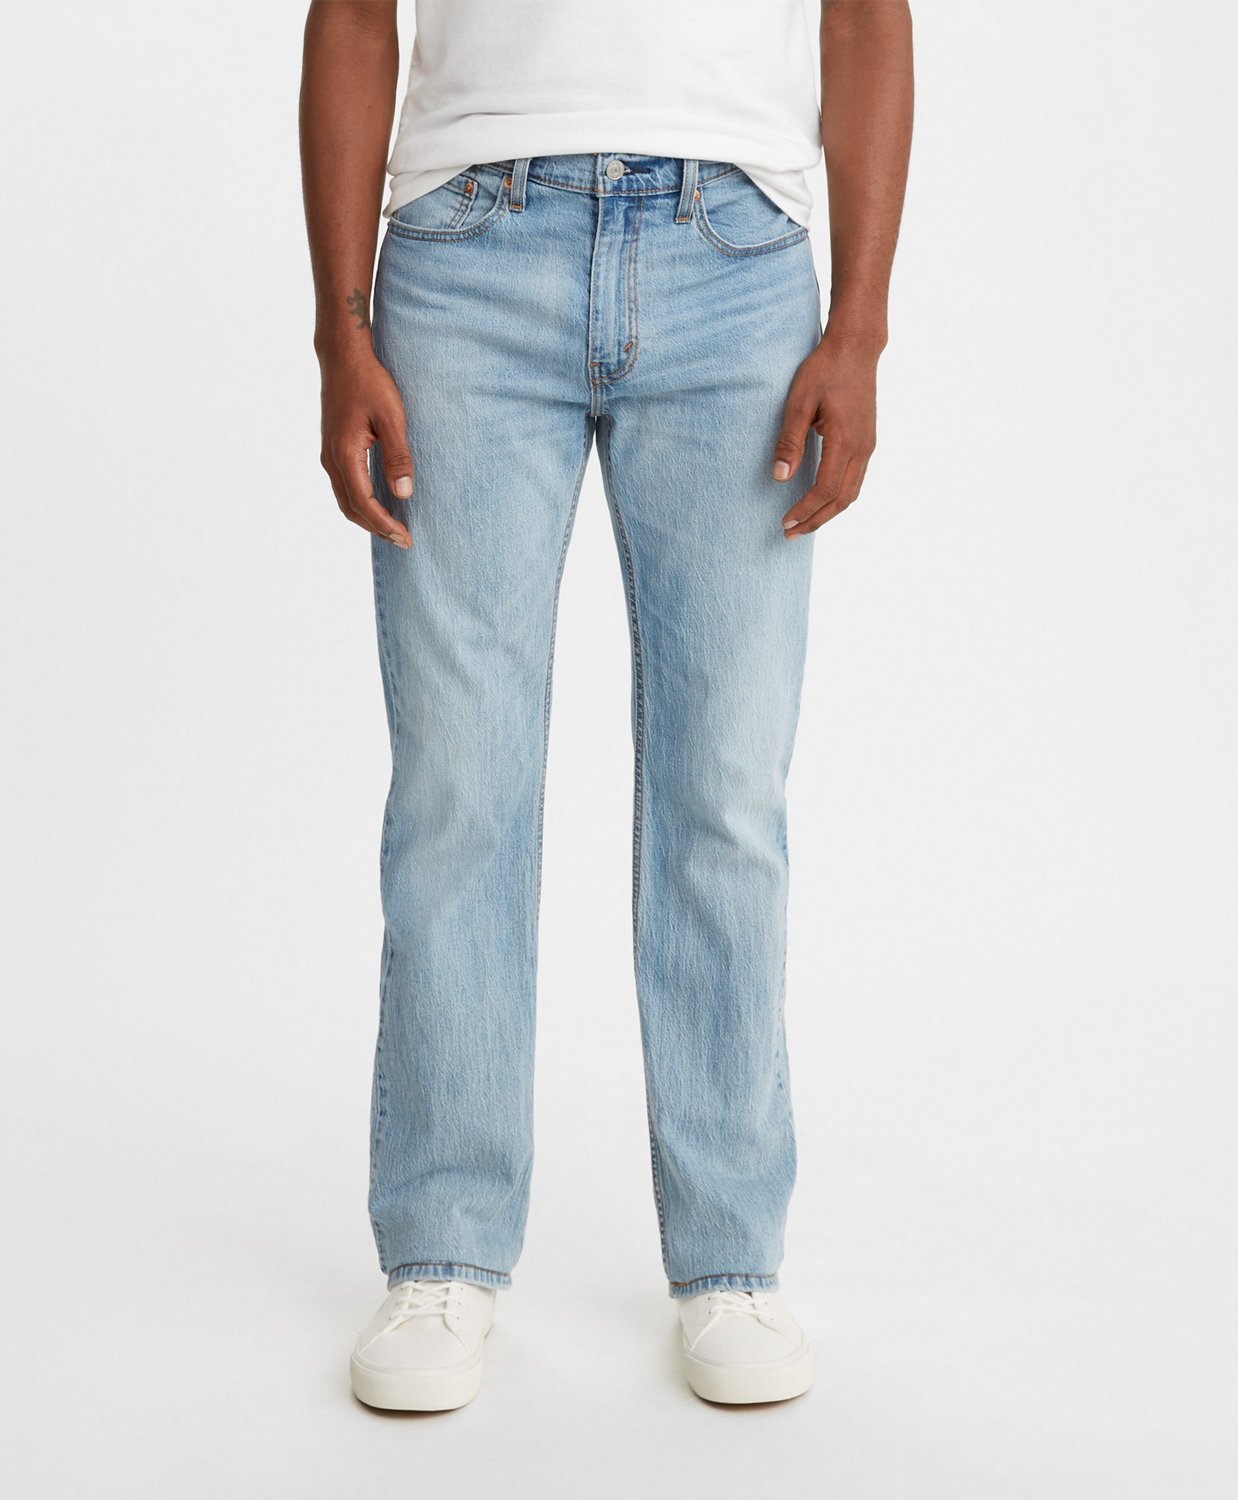 Levi's Men's 527 Relaxed Boot Cut Jean | Free Shipping at Academy